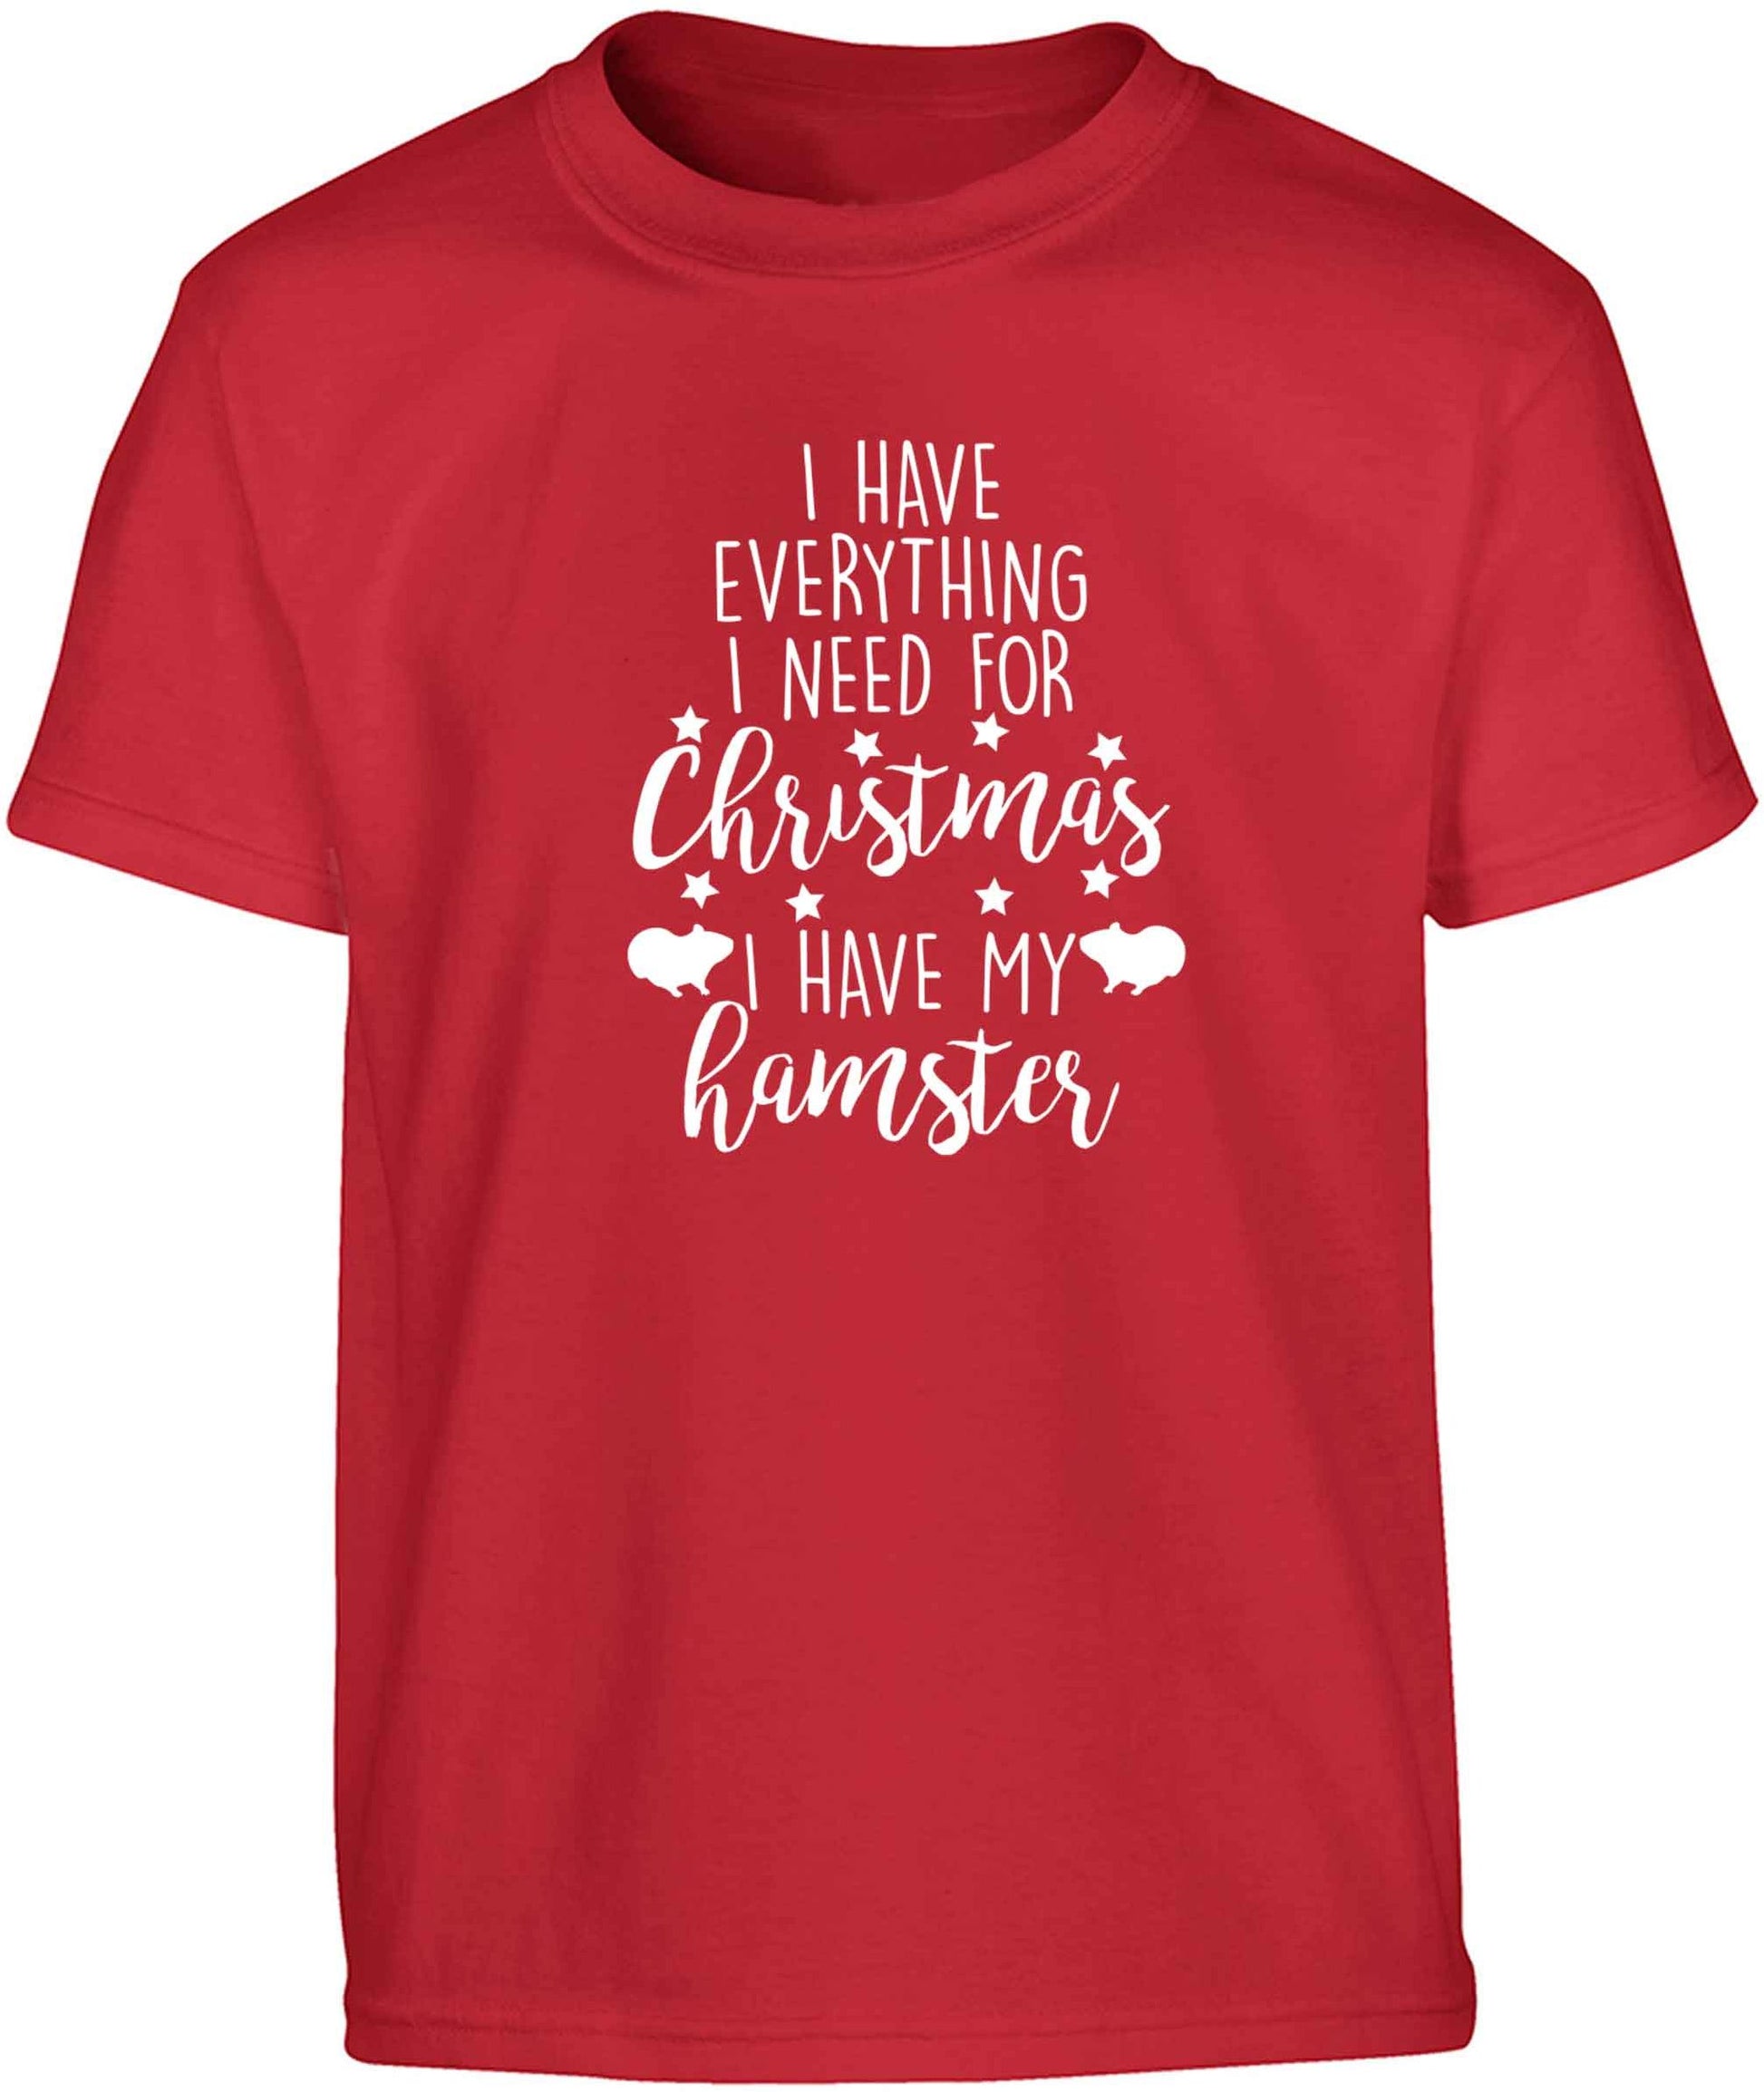 I have everything I need for Christmas I have my hamster Children's red Tshirt 12-13 Years